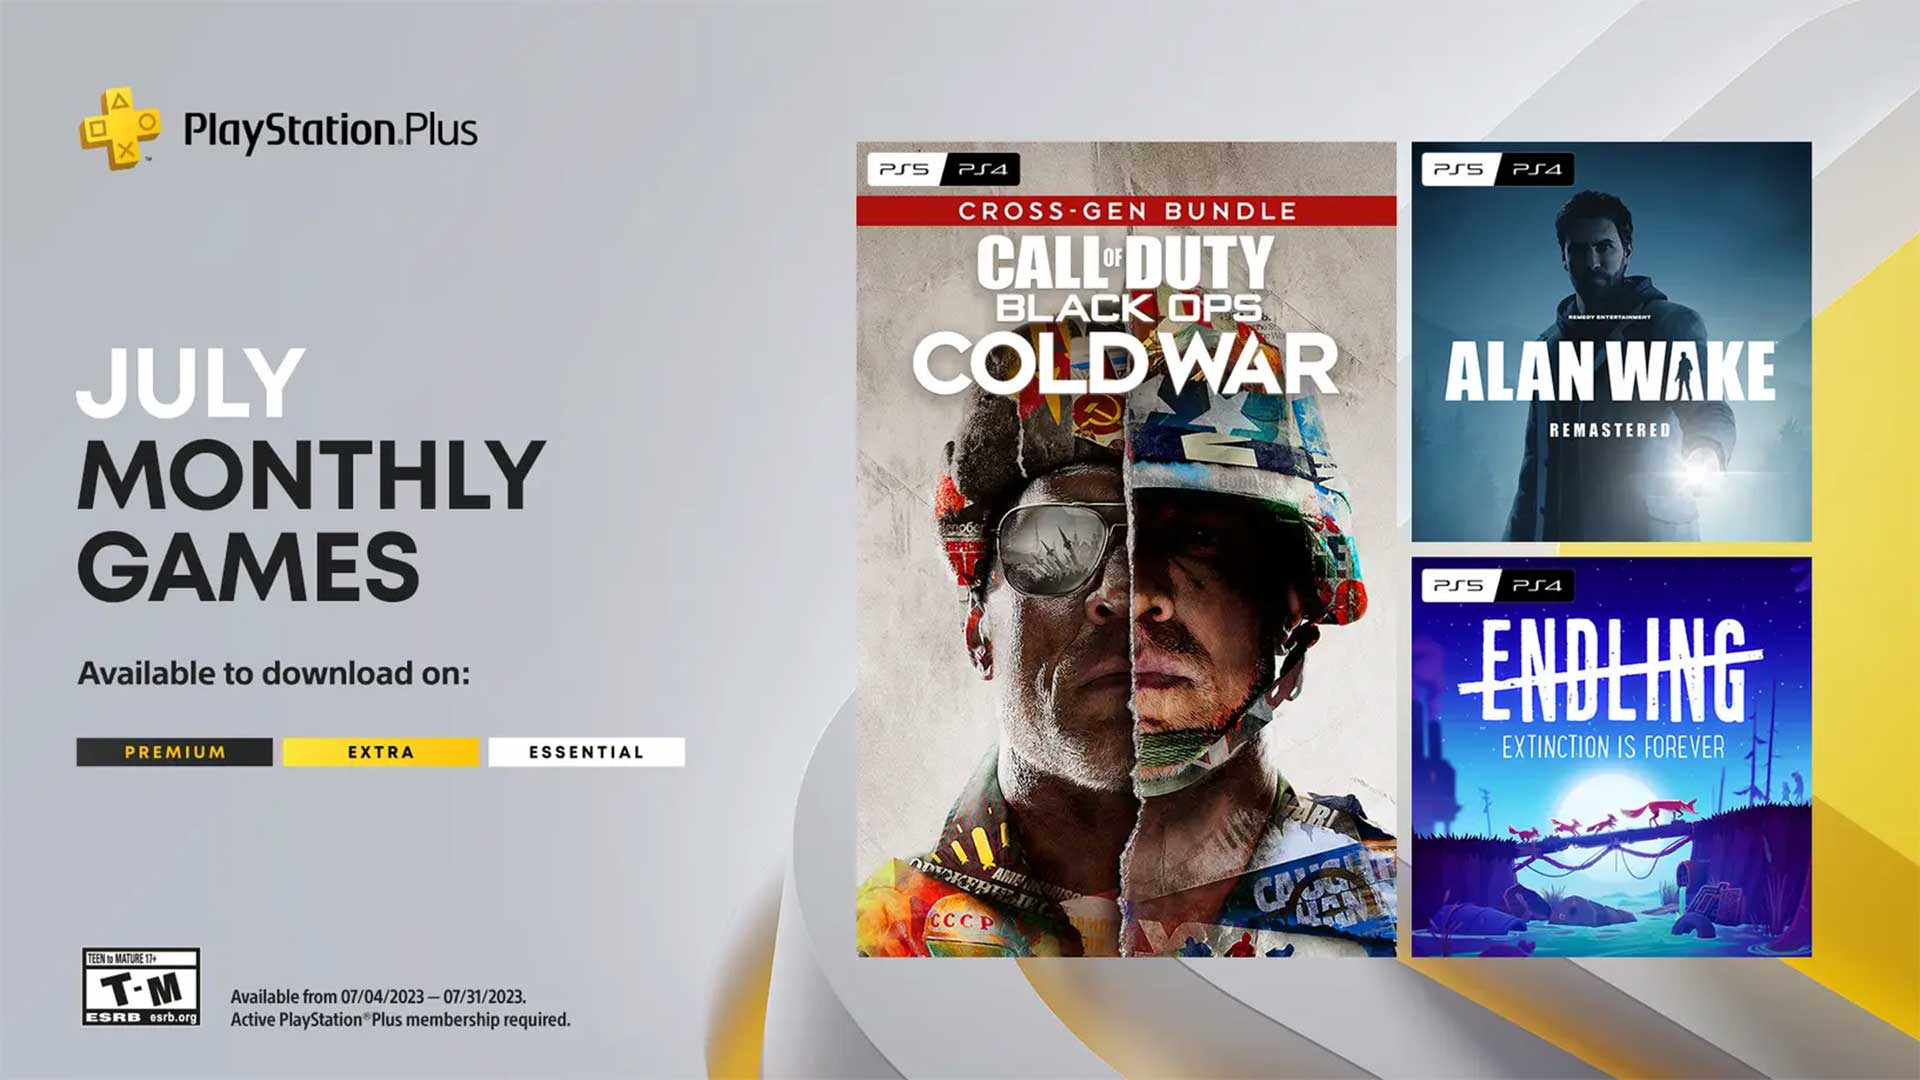 playstation plus july free games  Image of playstation plus july free games